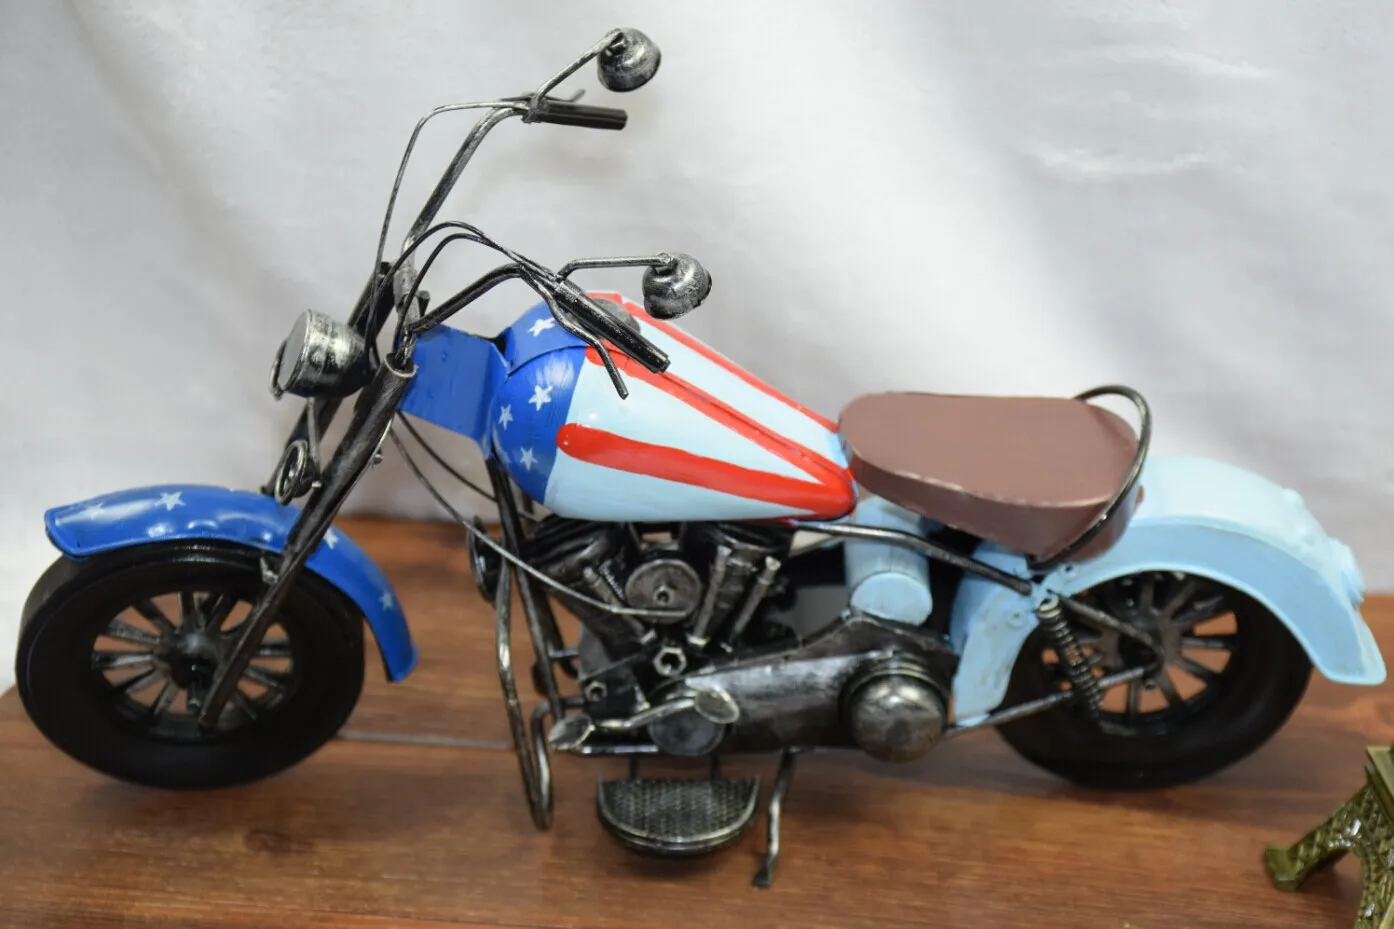 Retro Tinplate Motorcycle Diecast Model Car Toy with American Flag, Classic Handcrafted Work of Arts, Kid Birthday Party Boy Gift, Collecting, Decoration